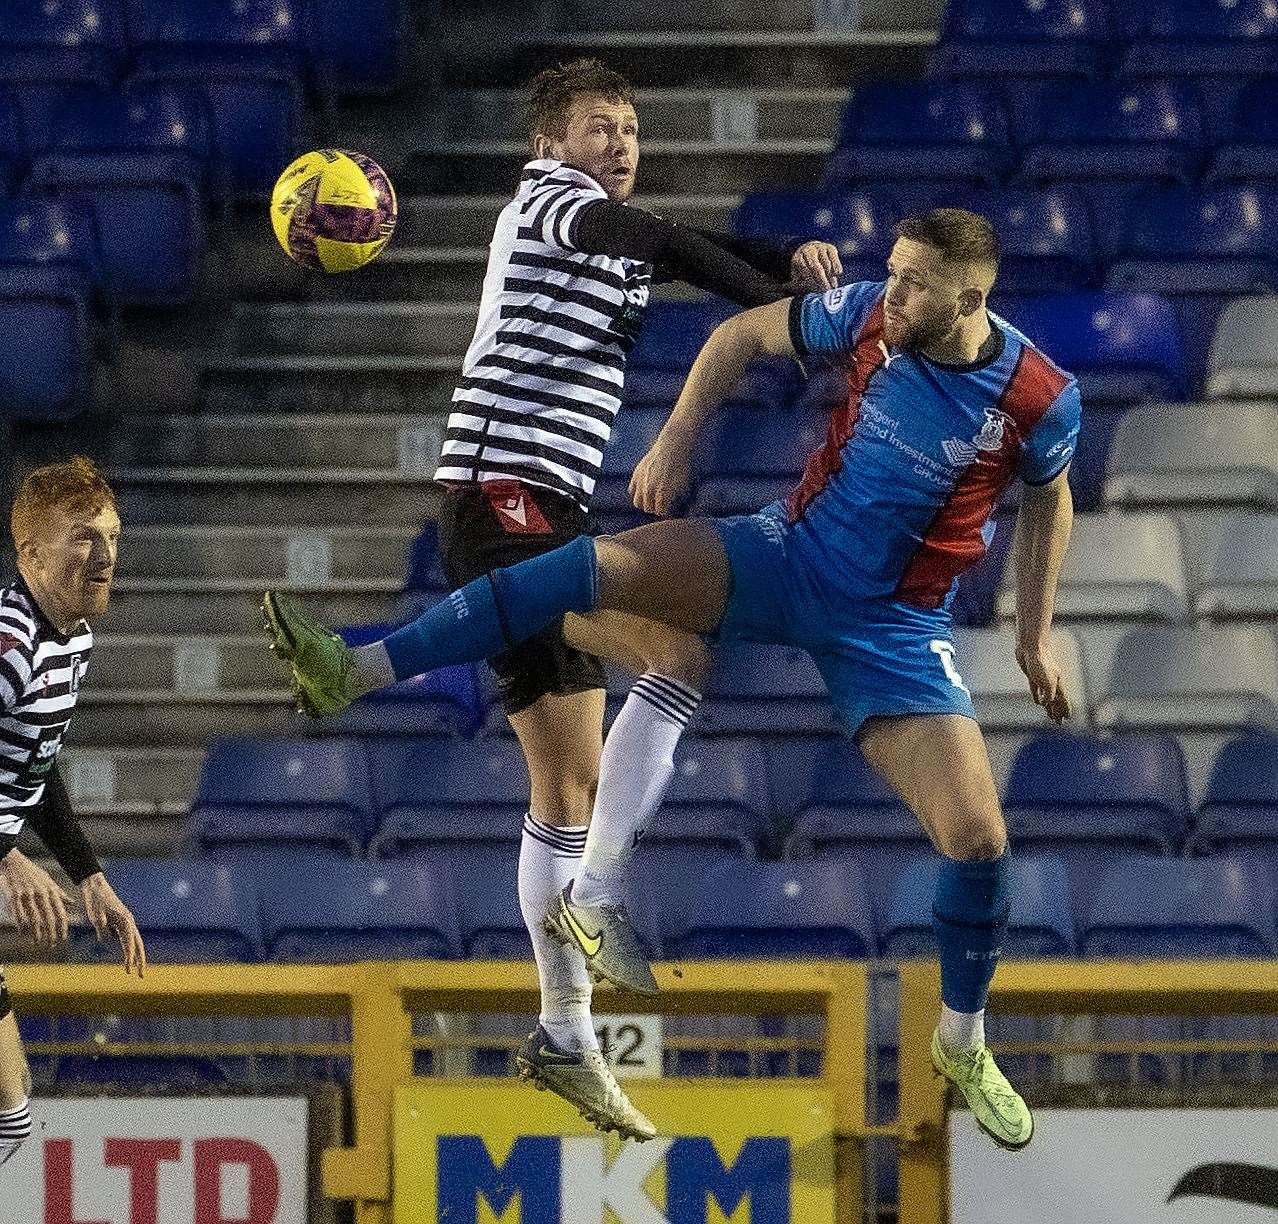 Danny Devine led Caley Thistle's defensive efforts with two crucial blocks to prevent goals. Picture: Ken Macpherson